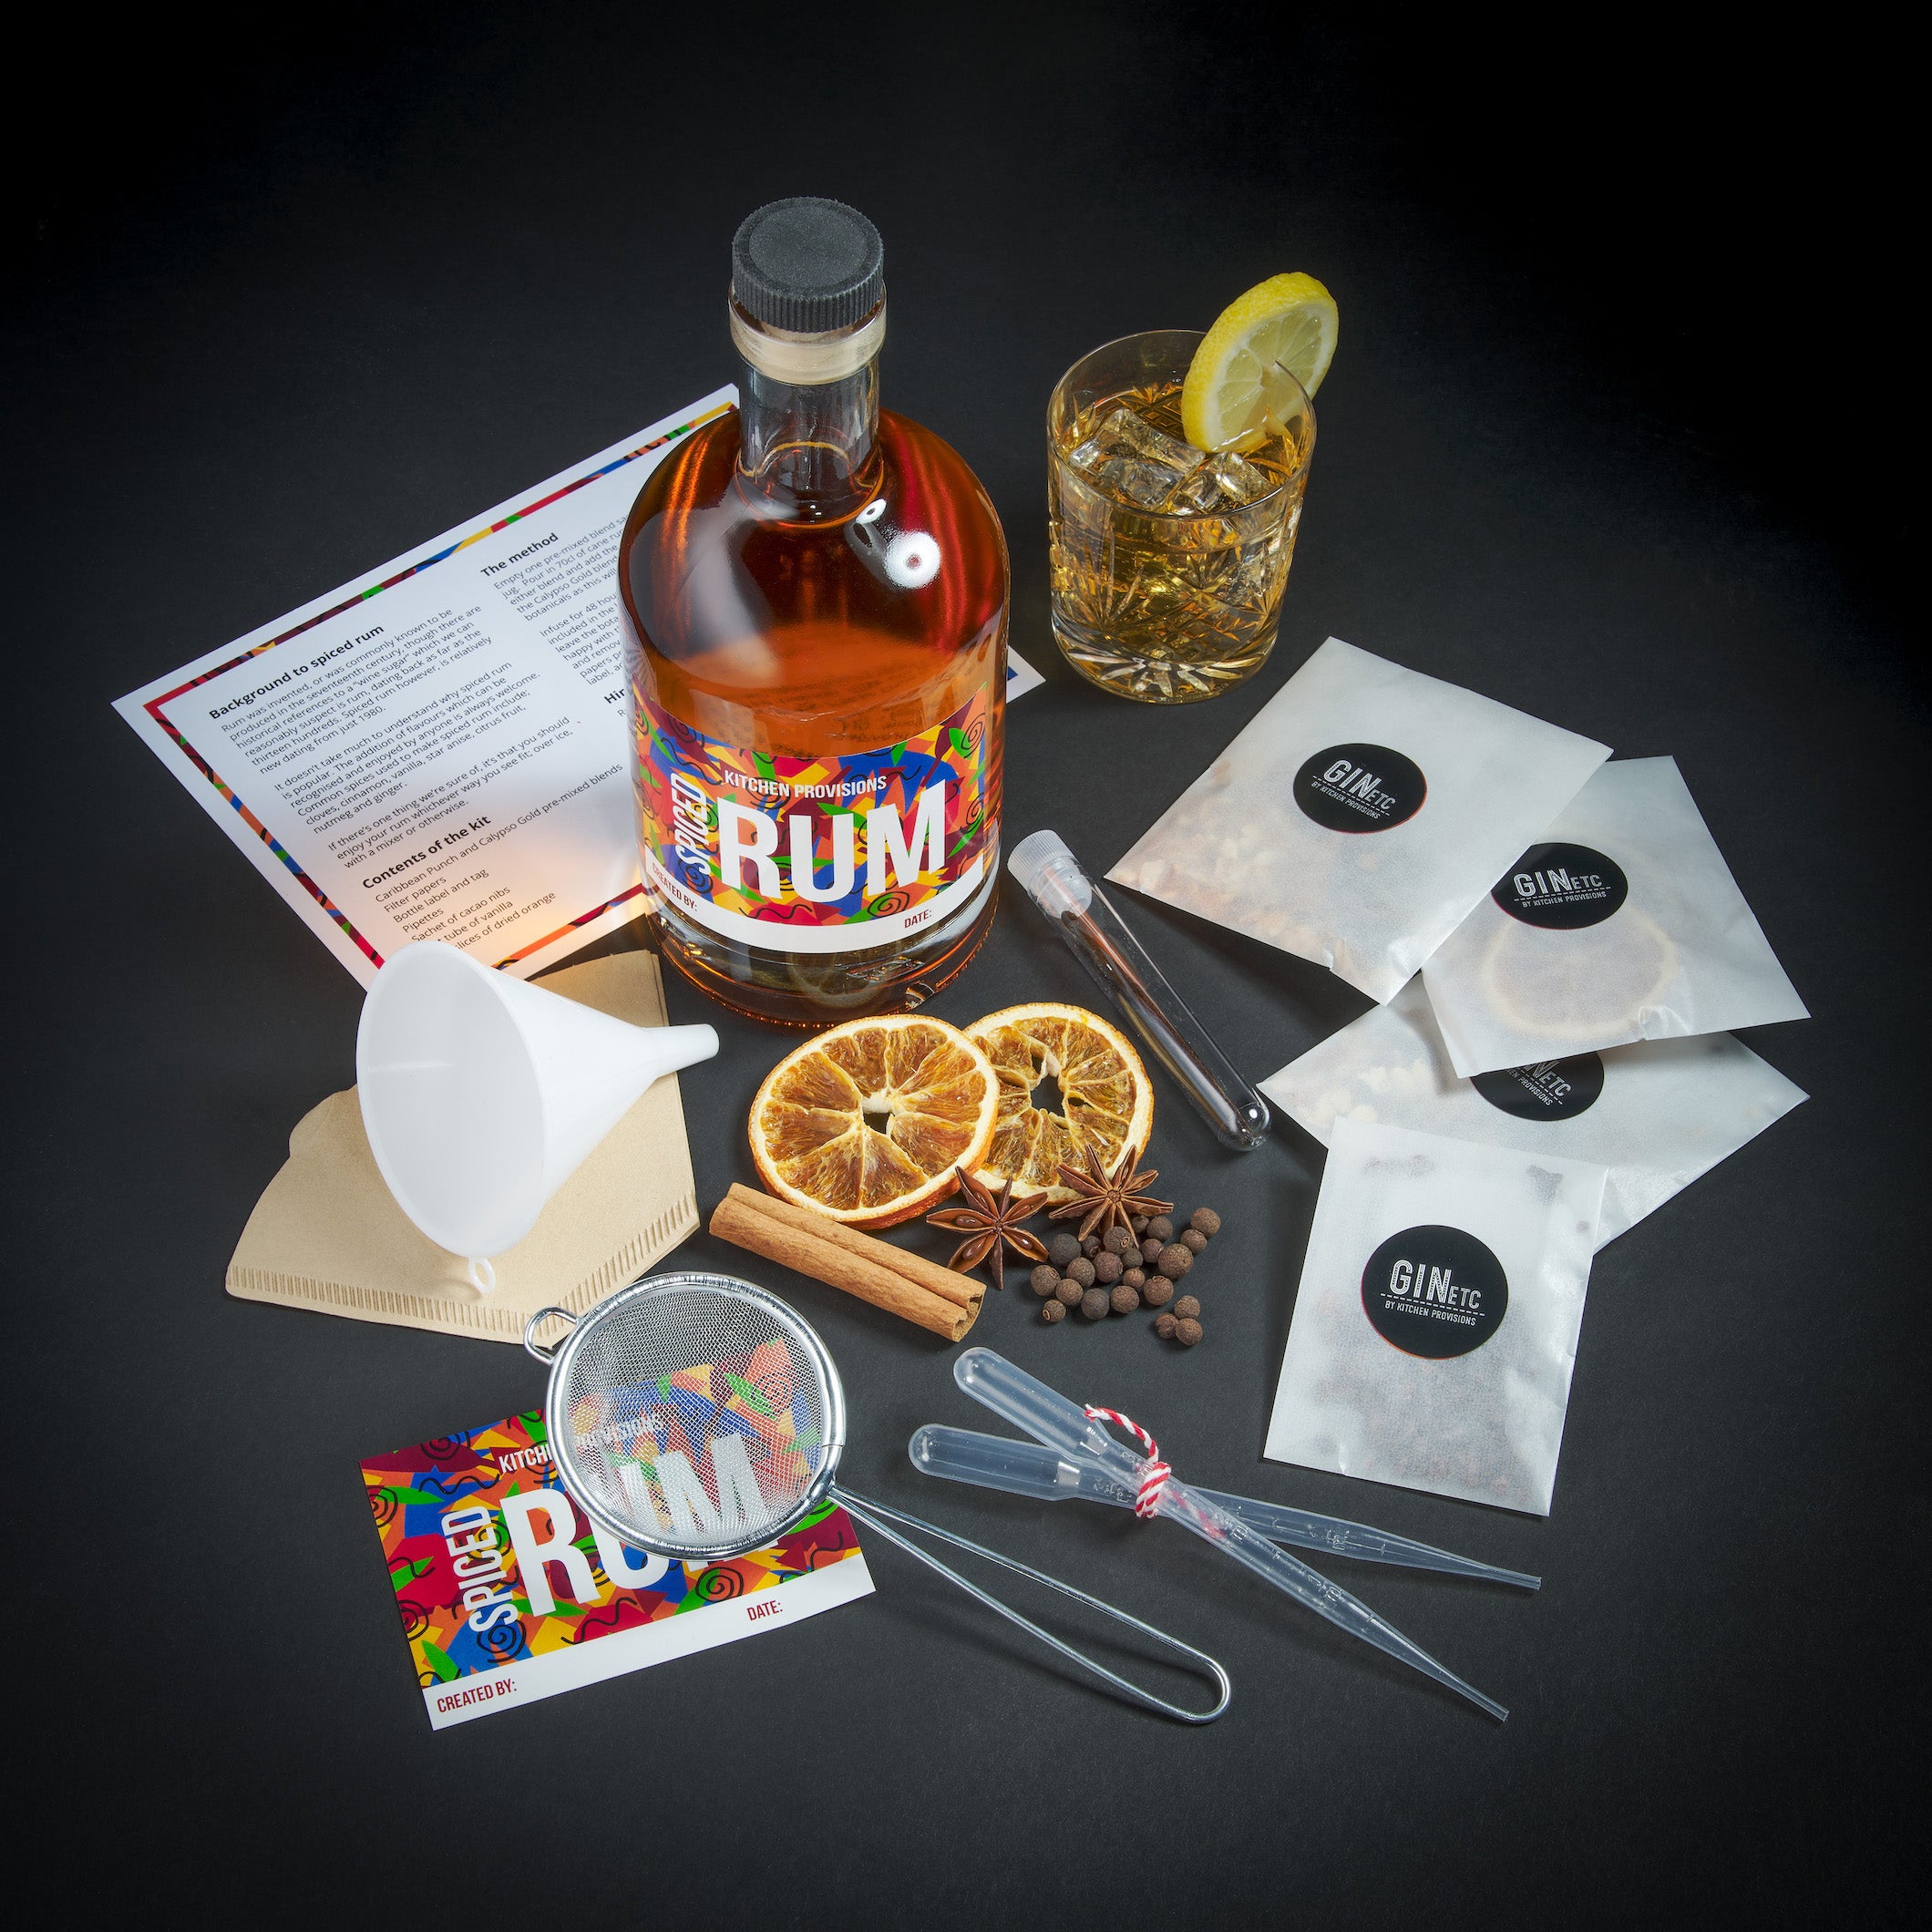 Gin Etc. Rum Maker's Kit - The Calypso Create your own Spiced Rum